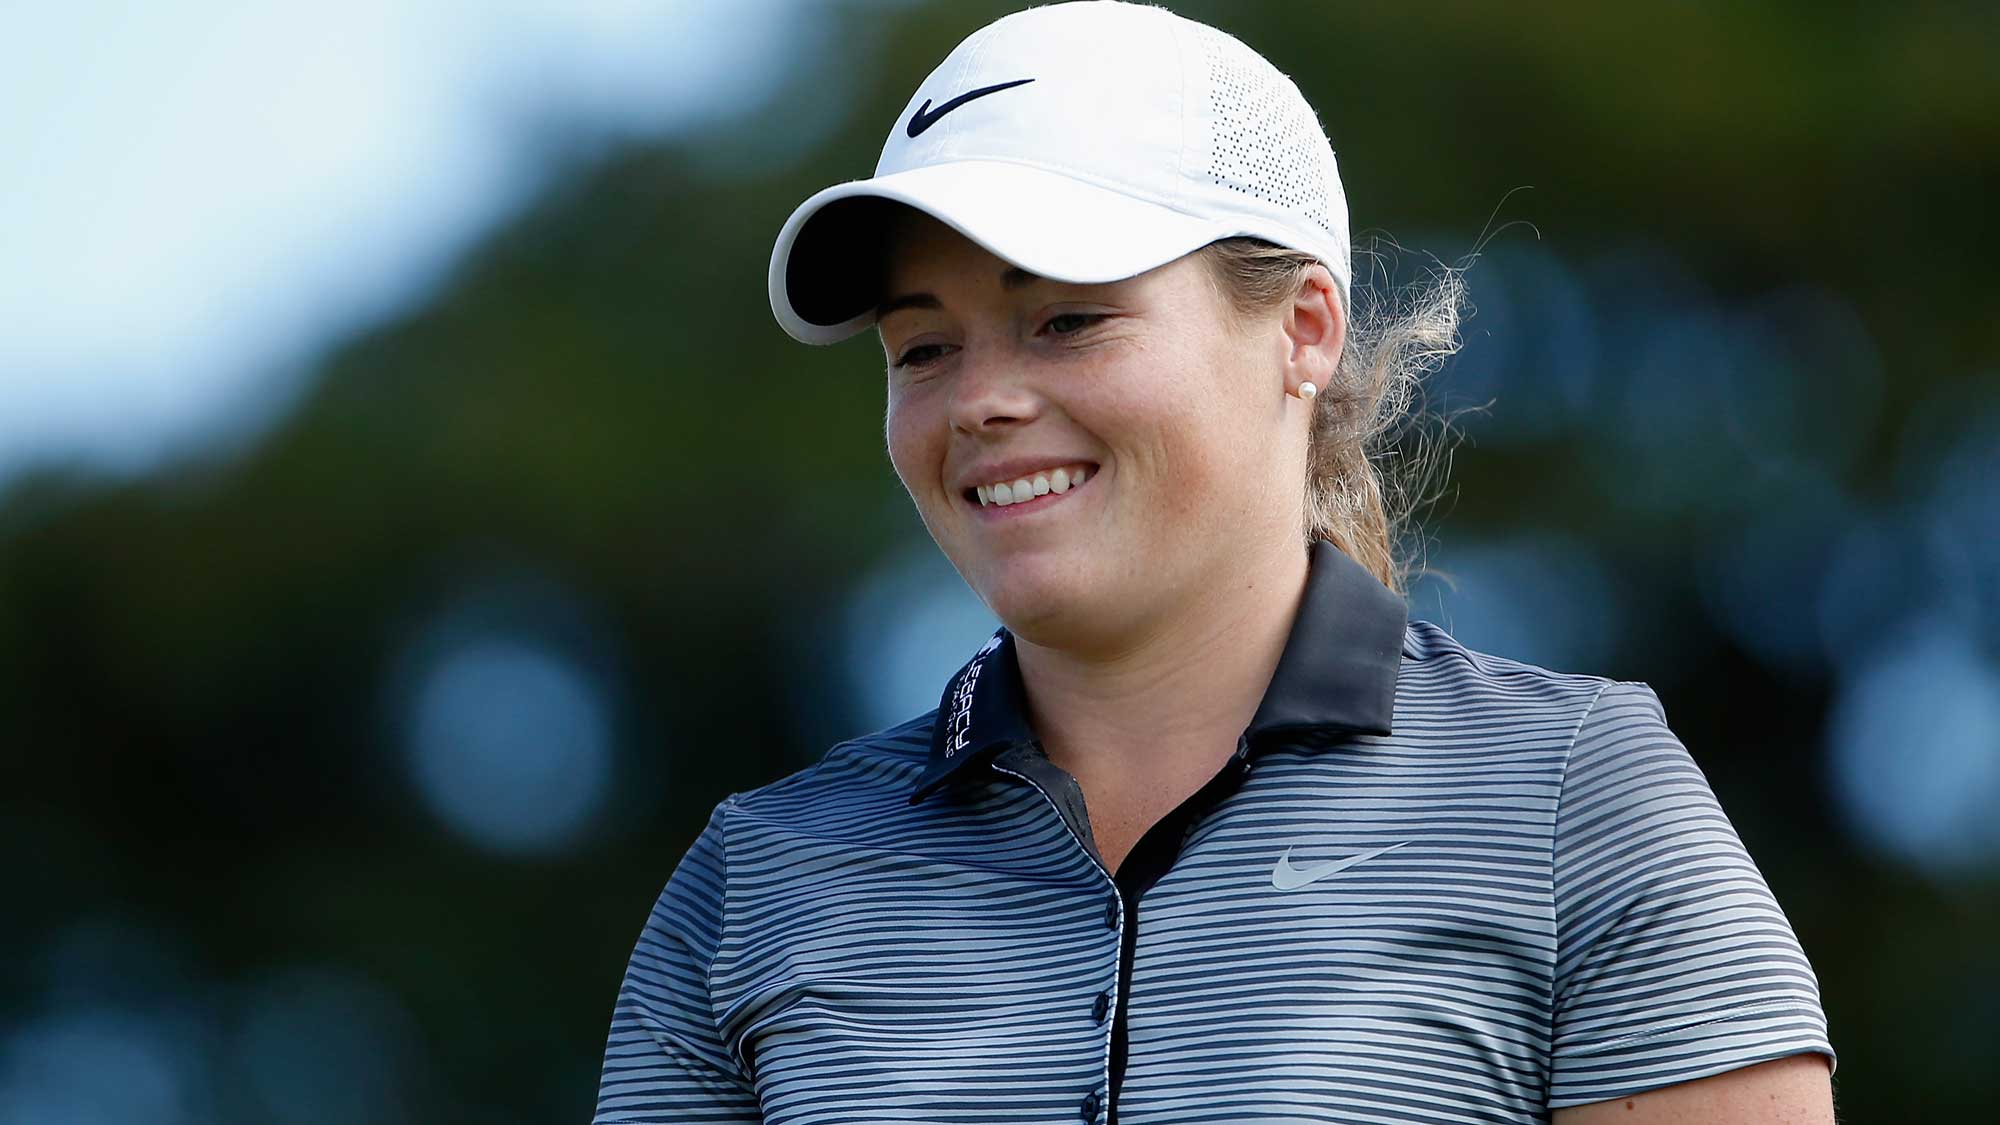 Katie Burnett smiles after her tee shot on the ninth hole during the second round of the LPGA LOTTE Championship 